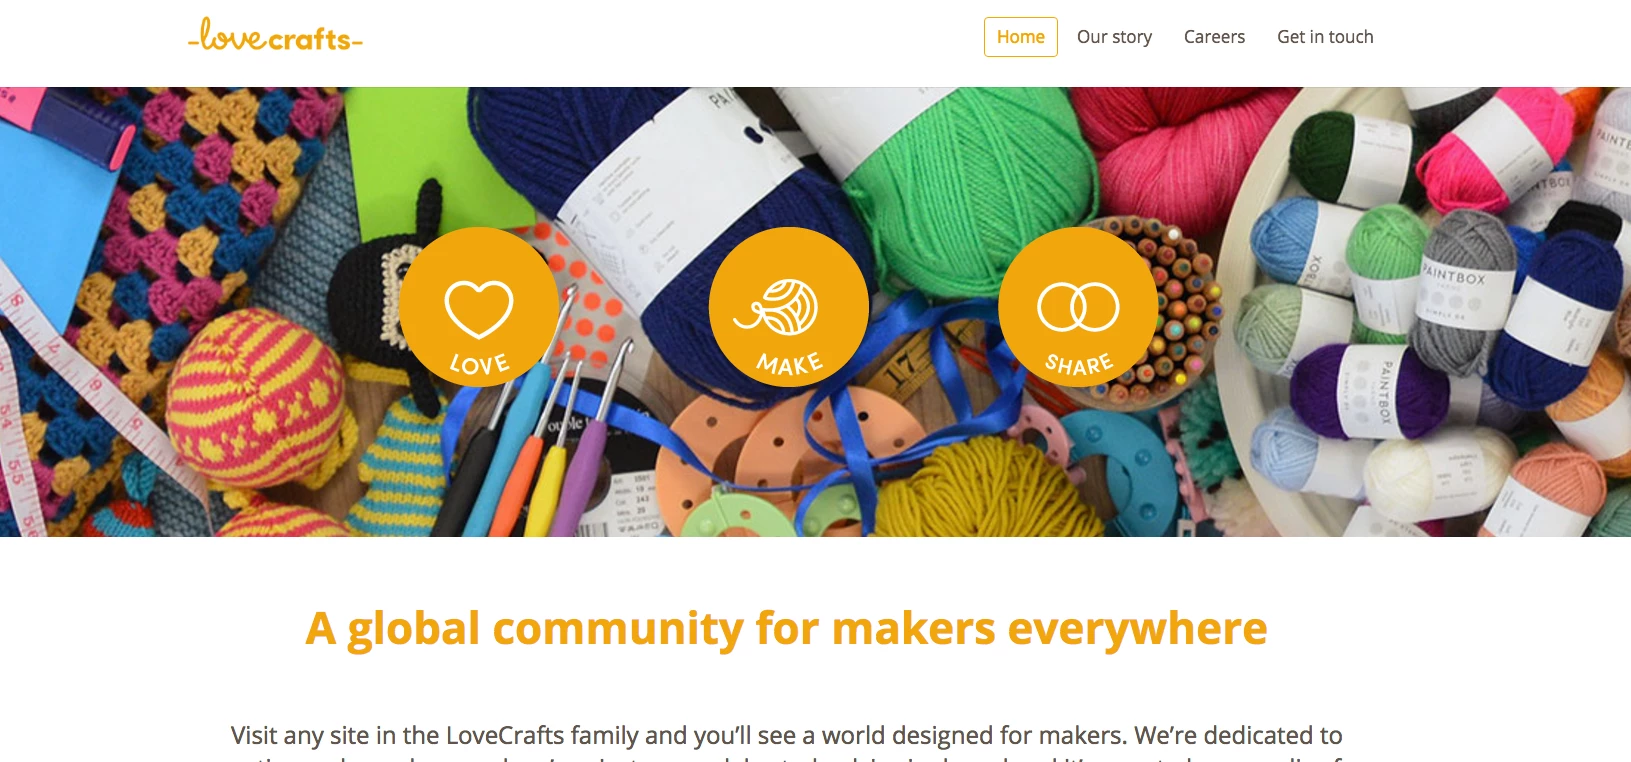 LoveCrafts has raised £26m in a funding round led by SEP.